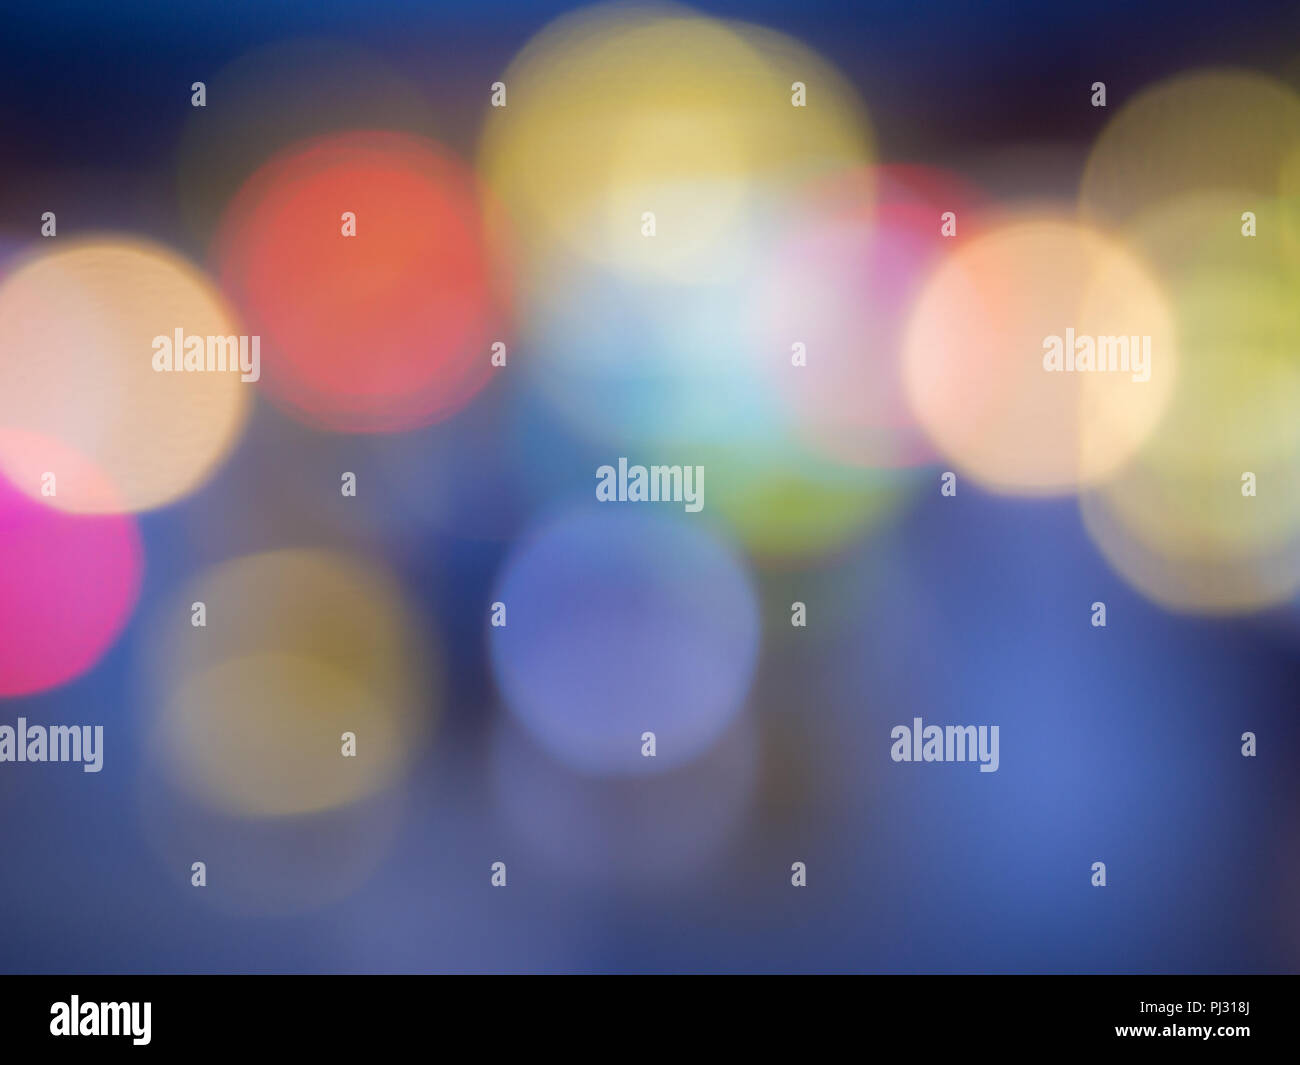 Background formed by blurred reflections of colored lights. Stock Photo